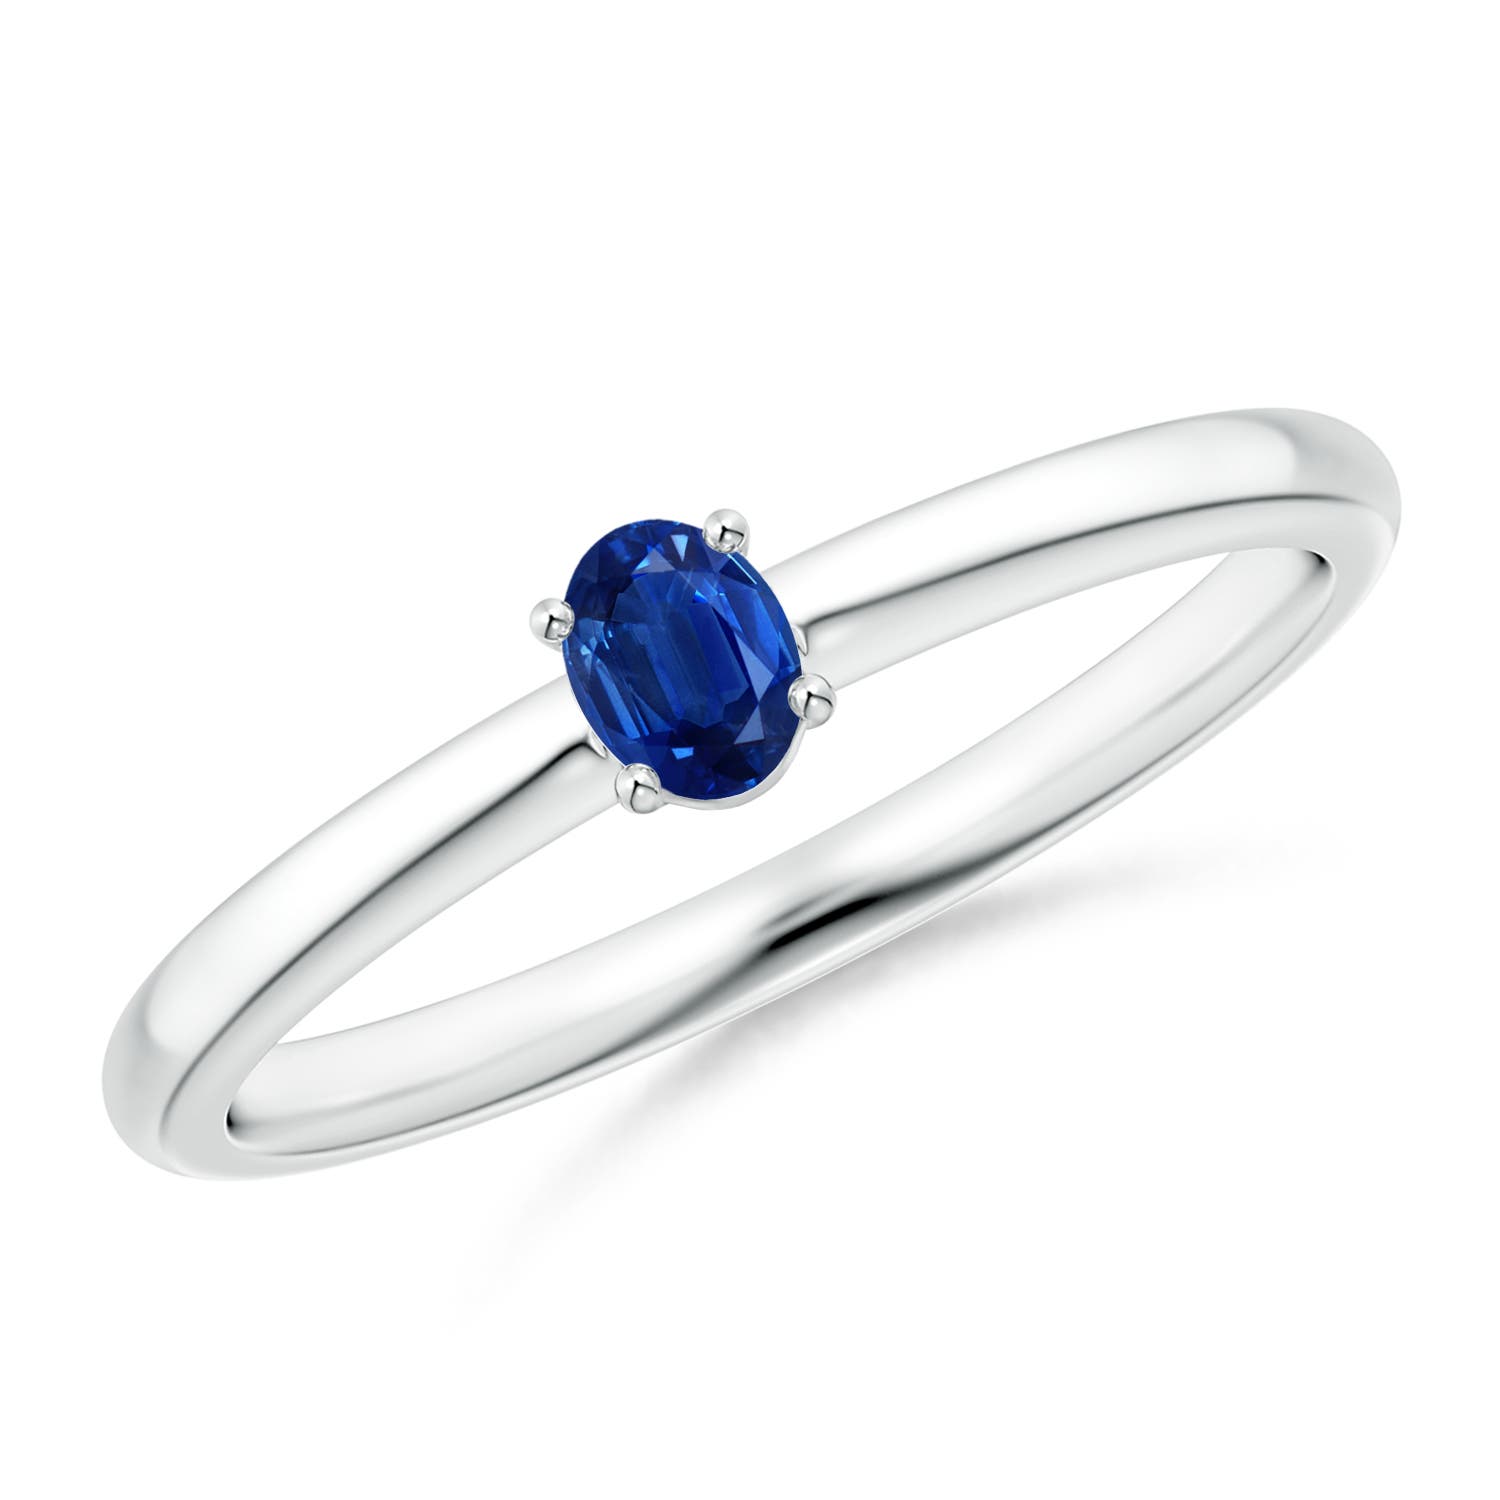 AAA - Blue Sapphire / 0.2 CT / 14 KT White Gold